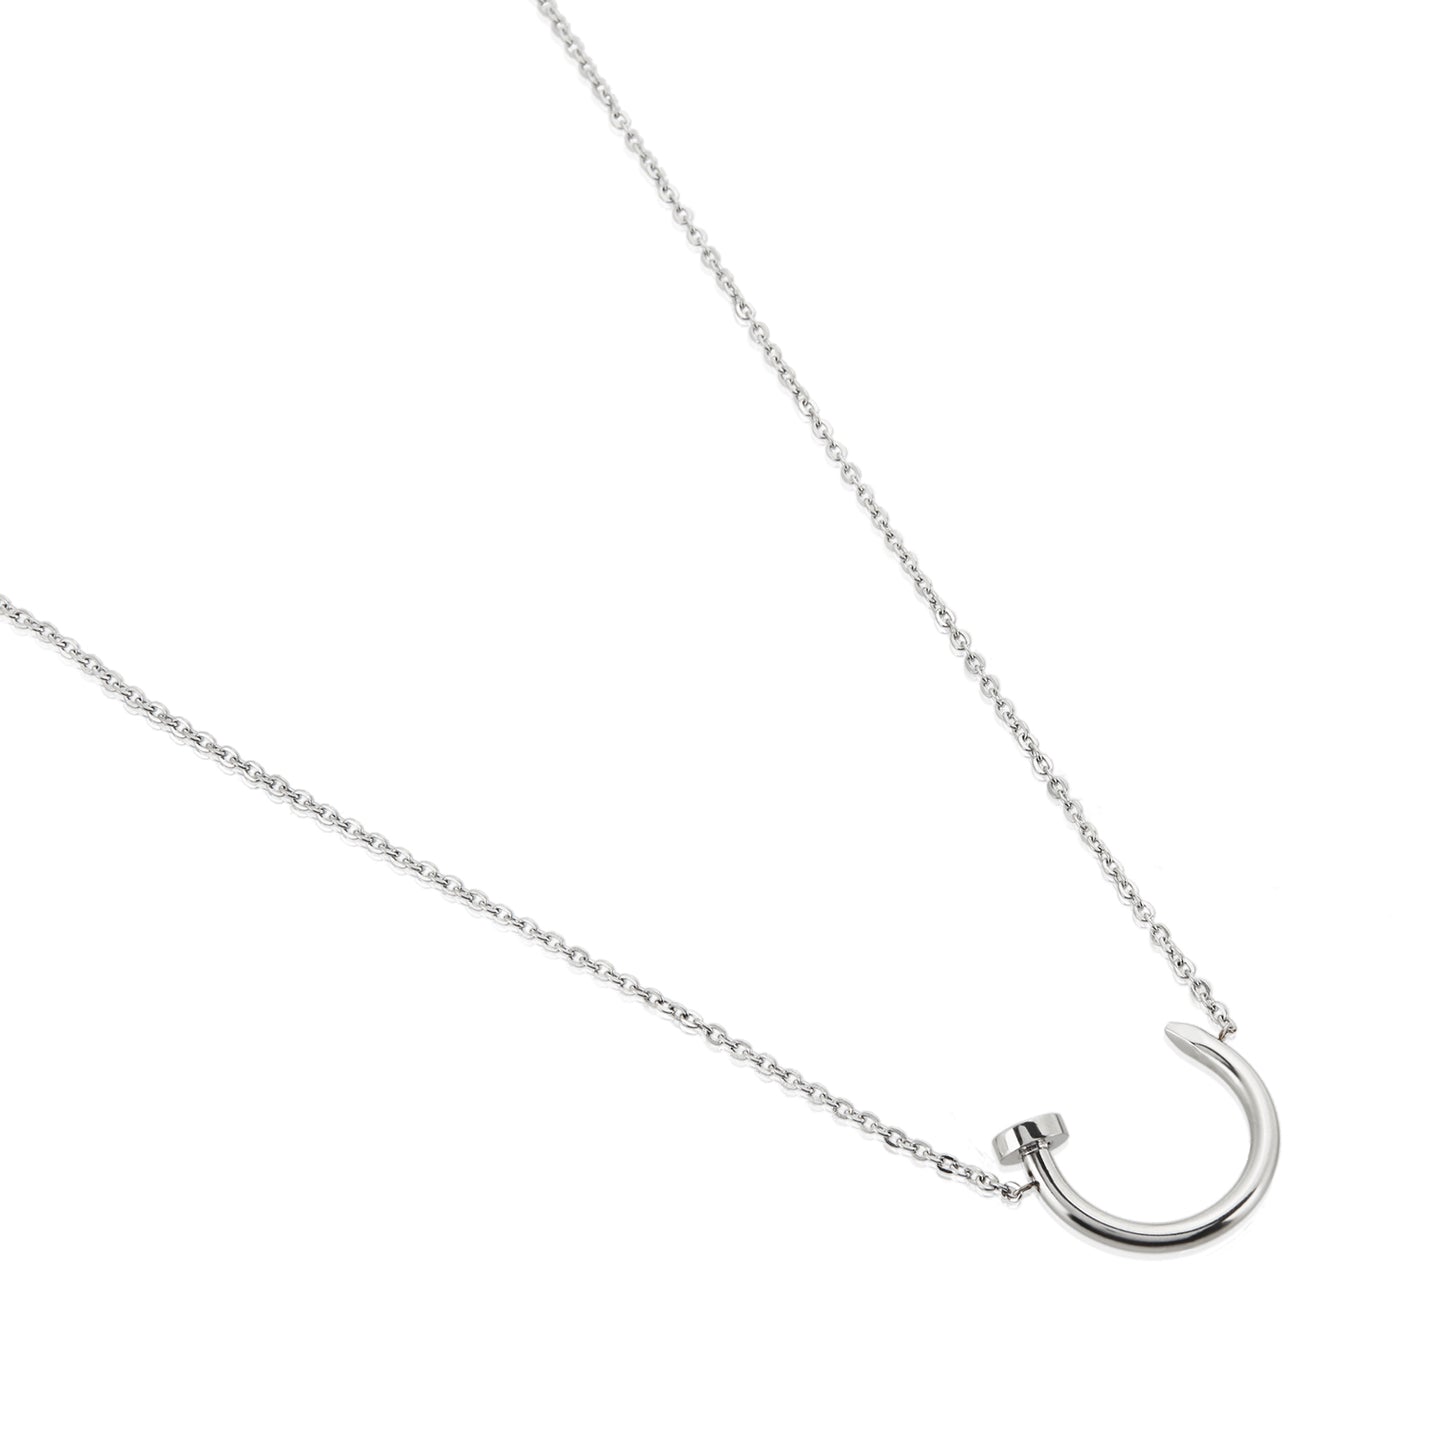 ELYA High Polished Curved Nail Stainless Steel Pendant Necklace - 18"